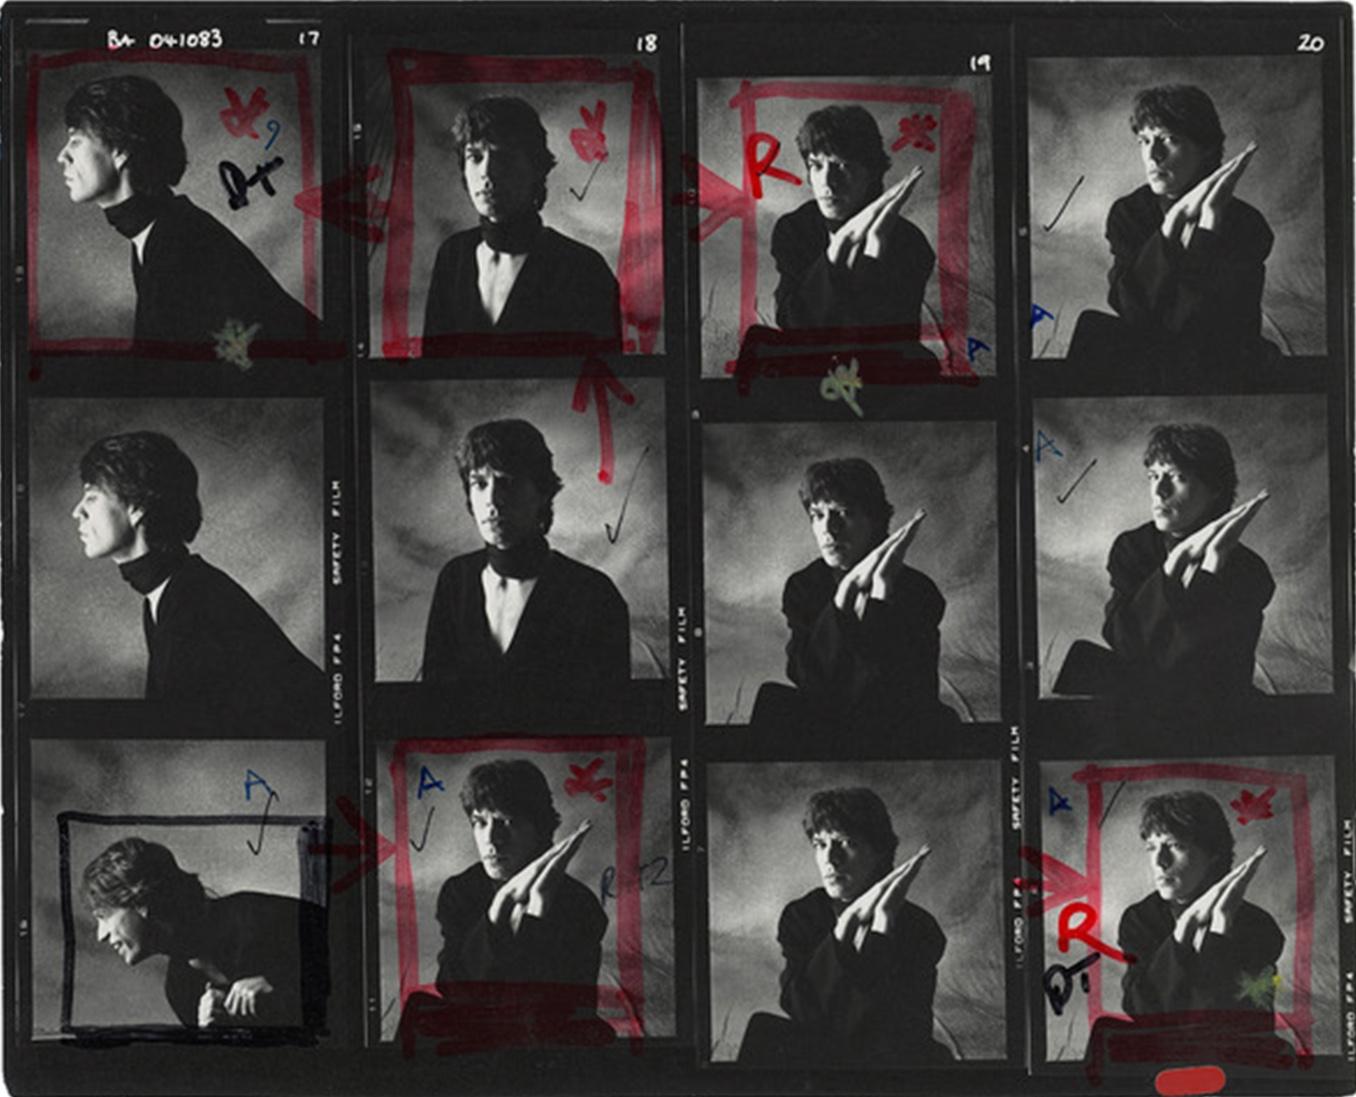 Signed limited edition contact sheet print of The Rolling Stones singer Mick Jagger by Brian Aris, taken from a session at Brian’s London studio

Signed limited edition 20x24" print, edition number 6/20.

Brian Aris limited edition prints, signed